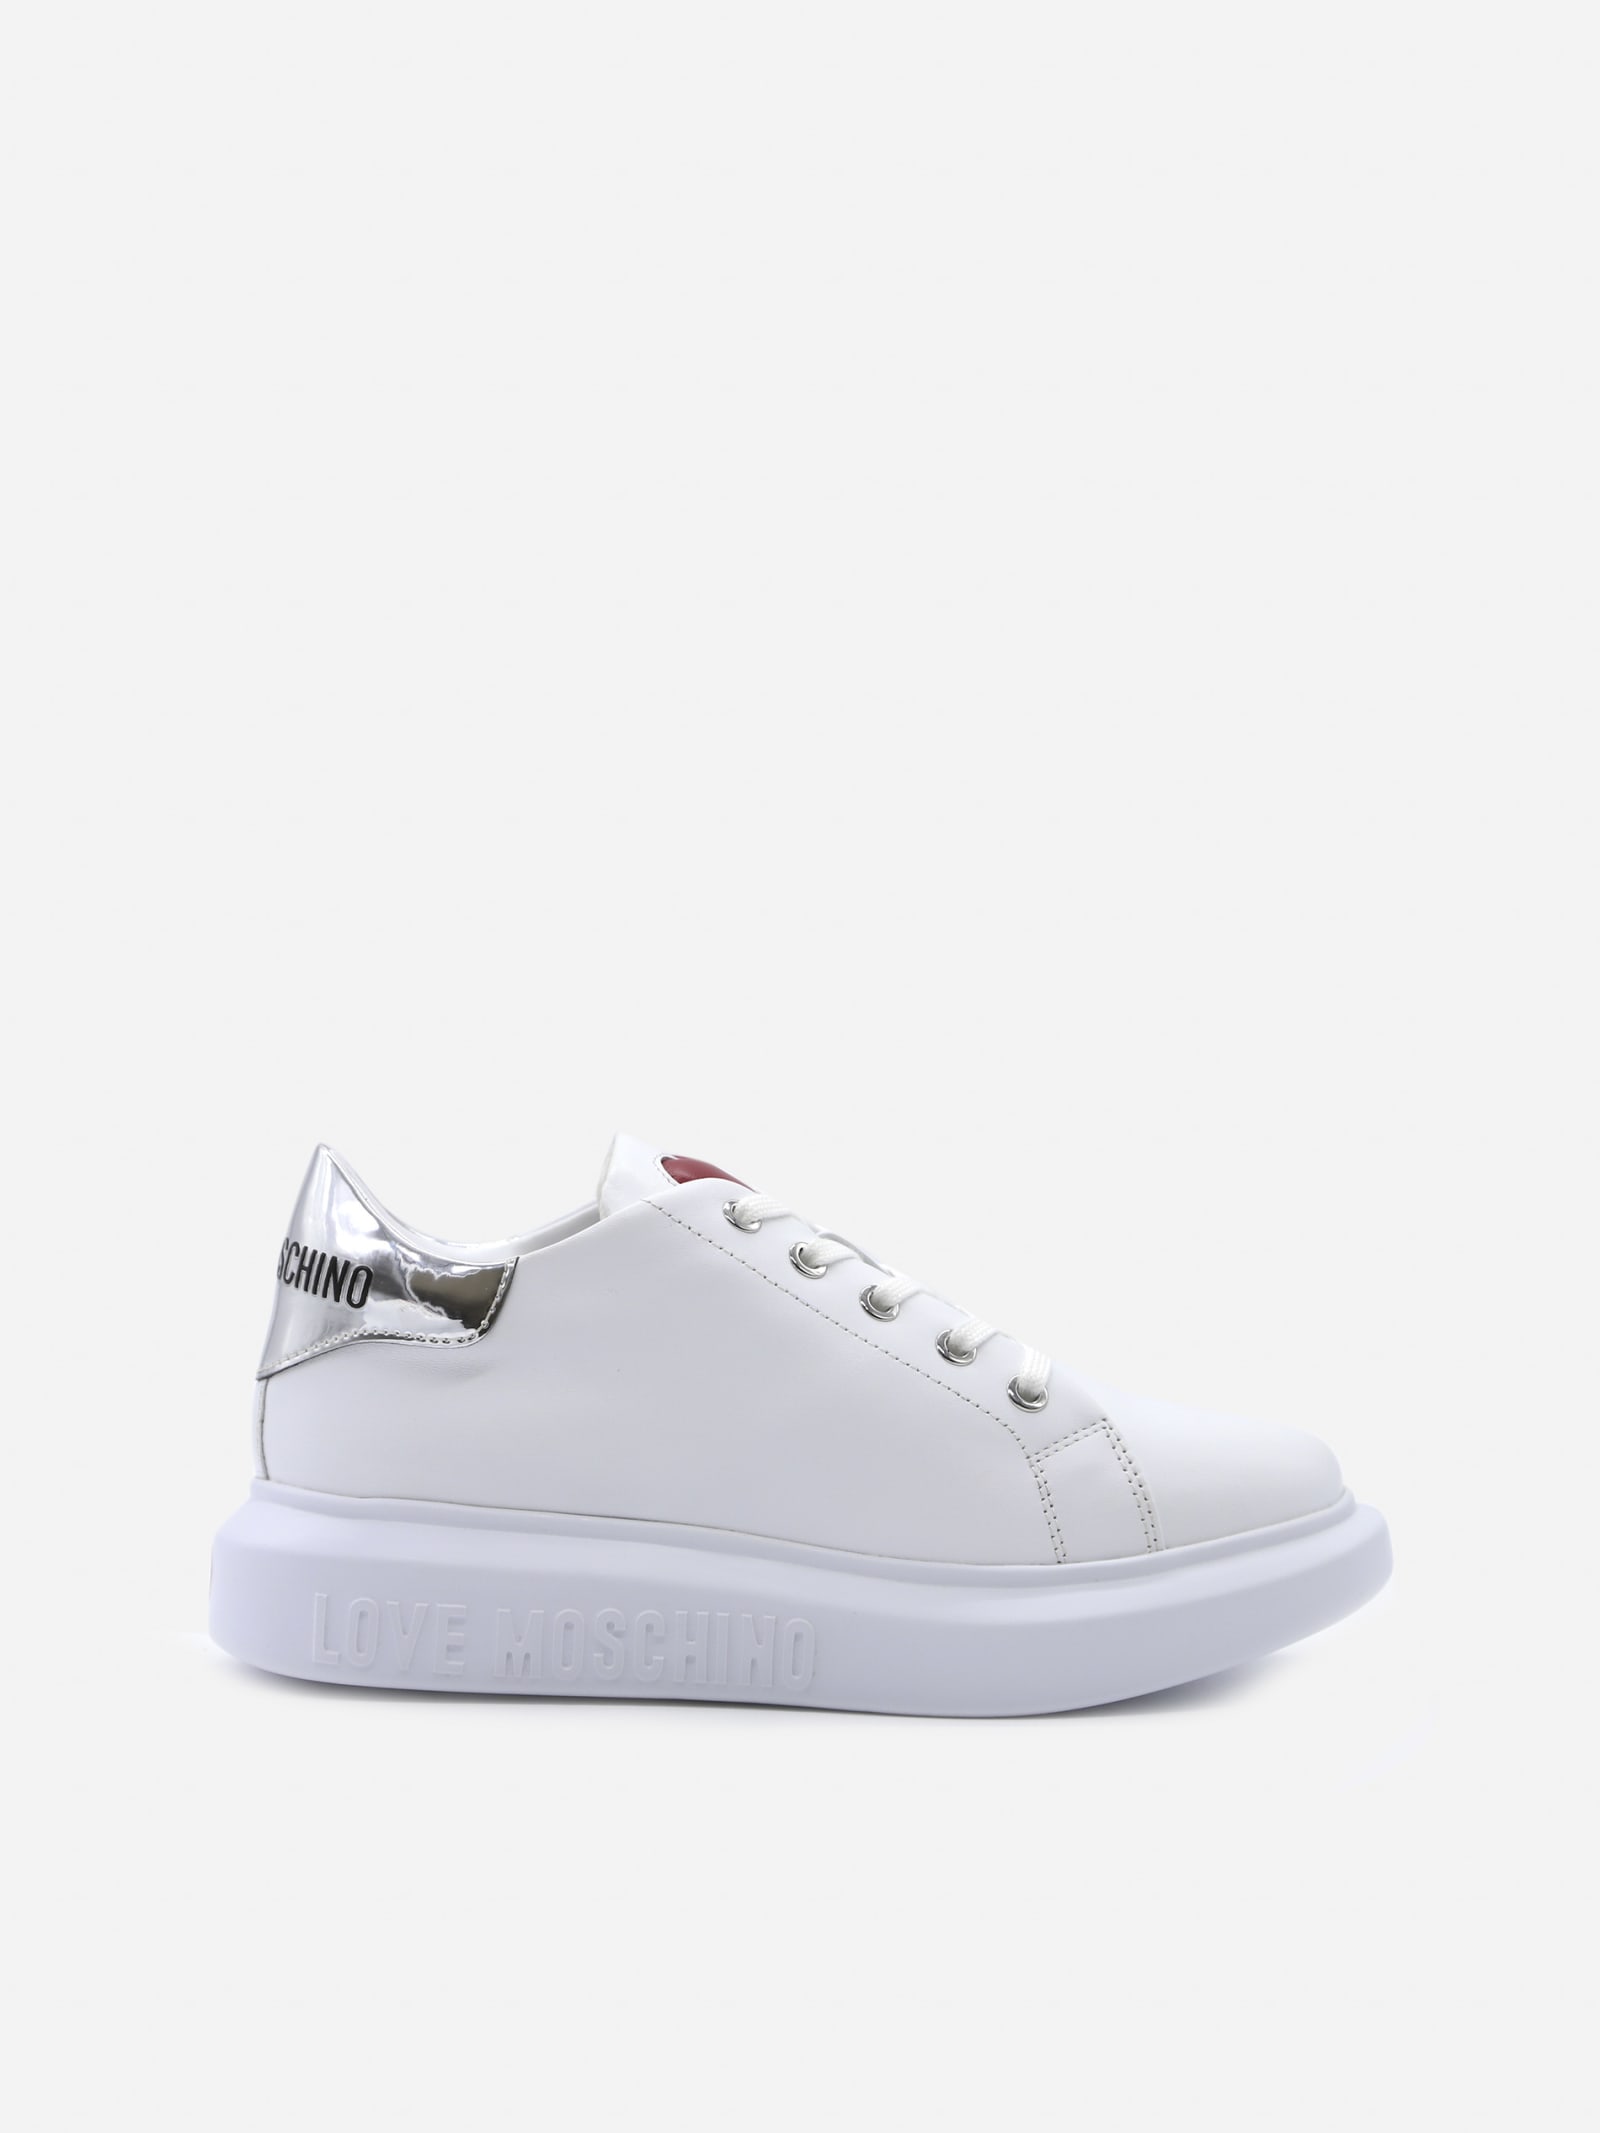 Love Moschino Leather Sneakers With Contrasting Heel Tab